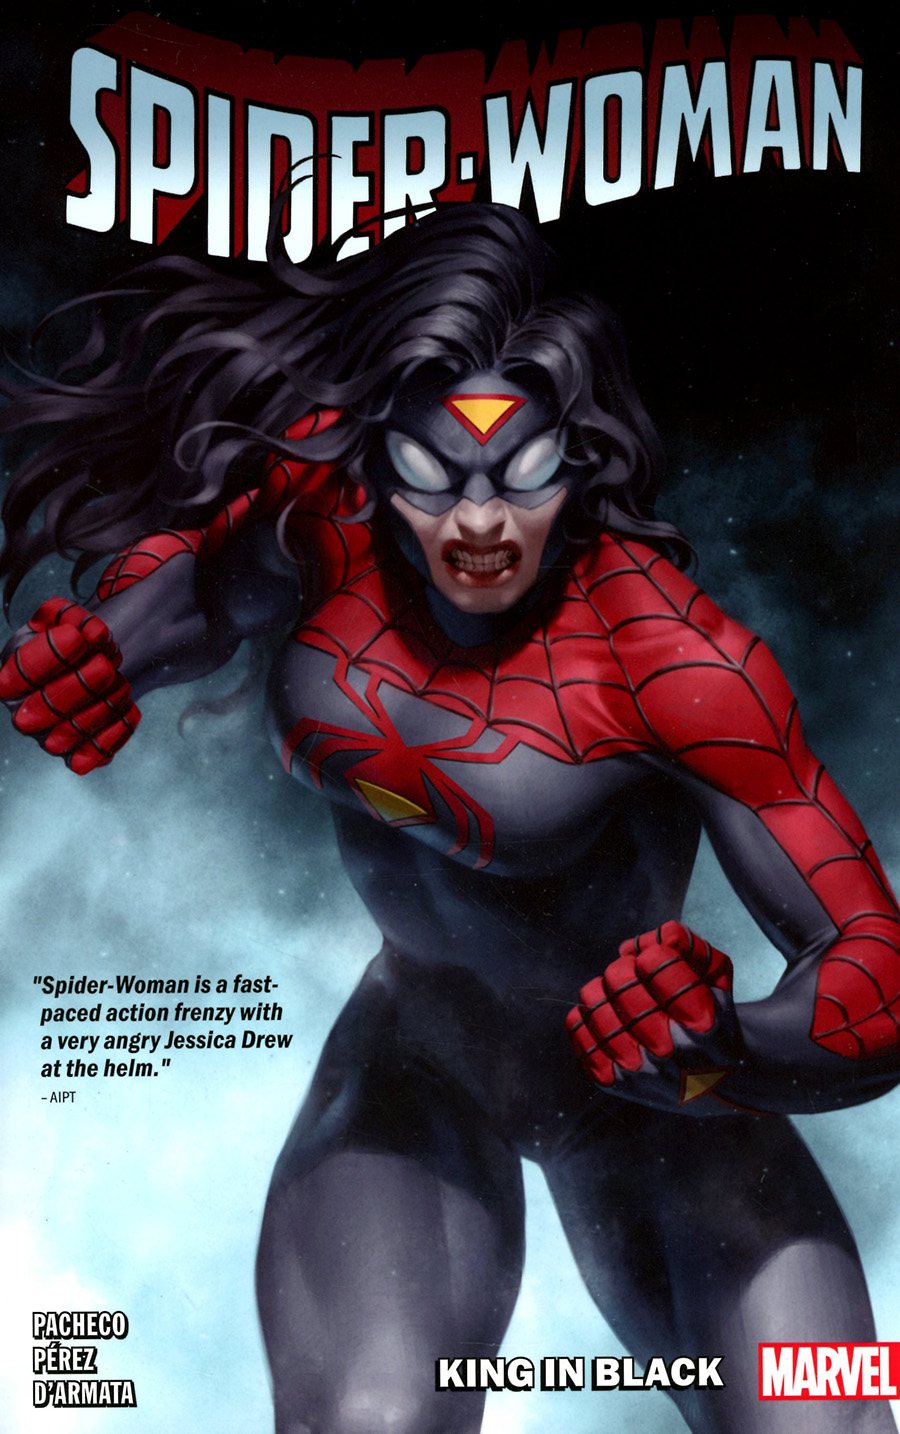 Spider-Woman (2020) Vol 2 King In Black TP